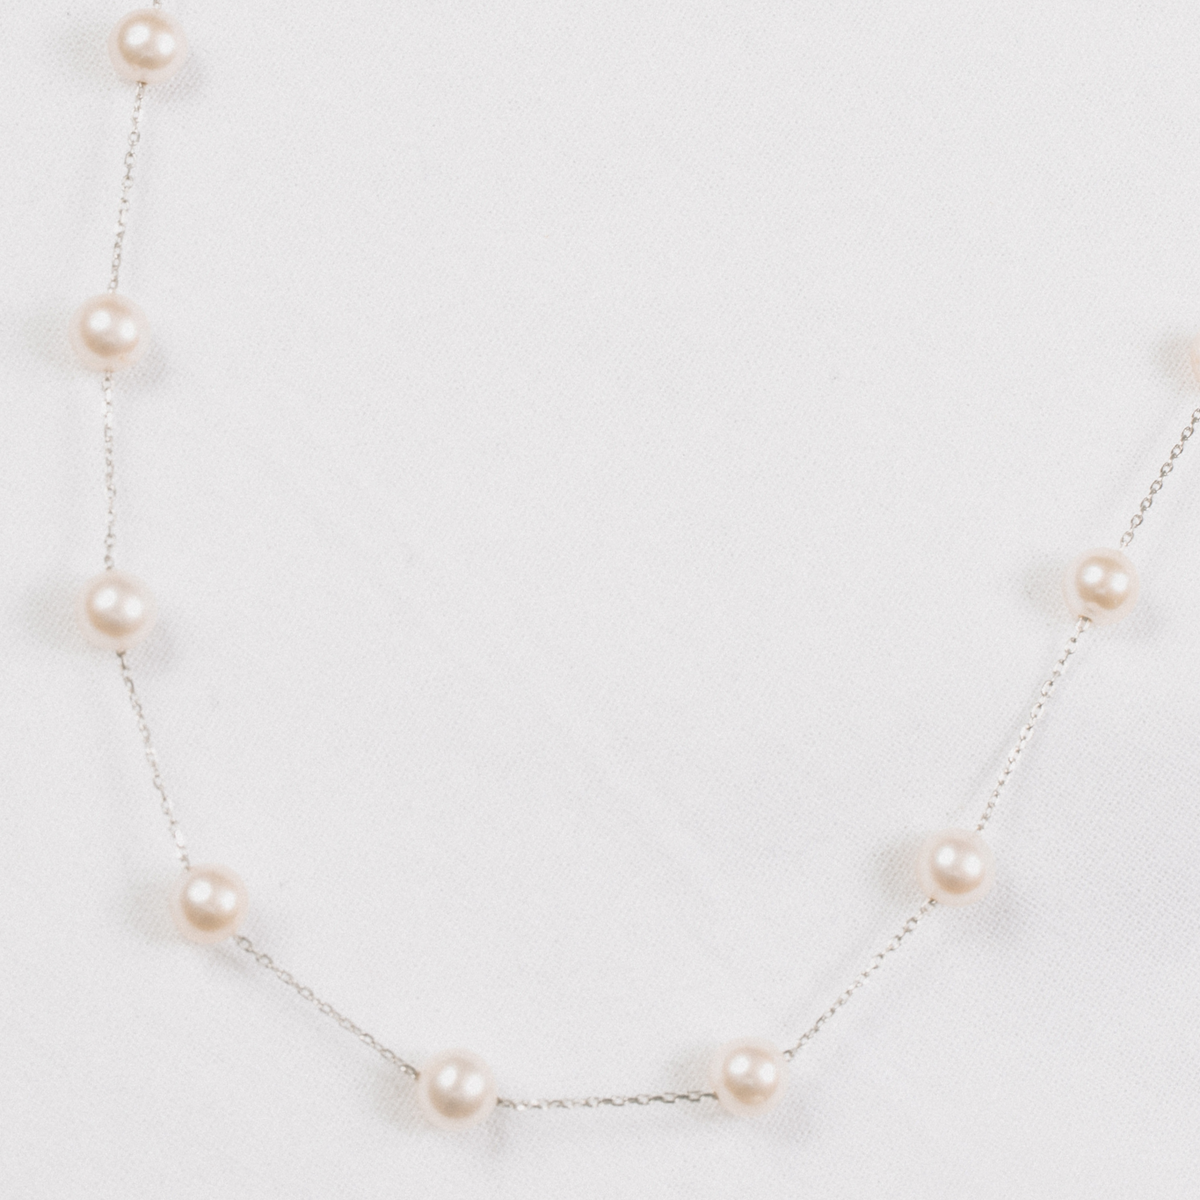 Pearl and Chain Necklace